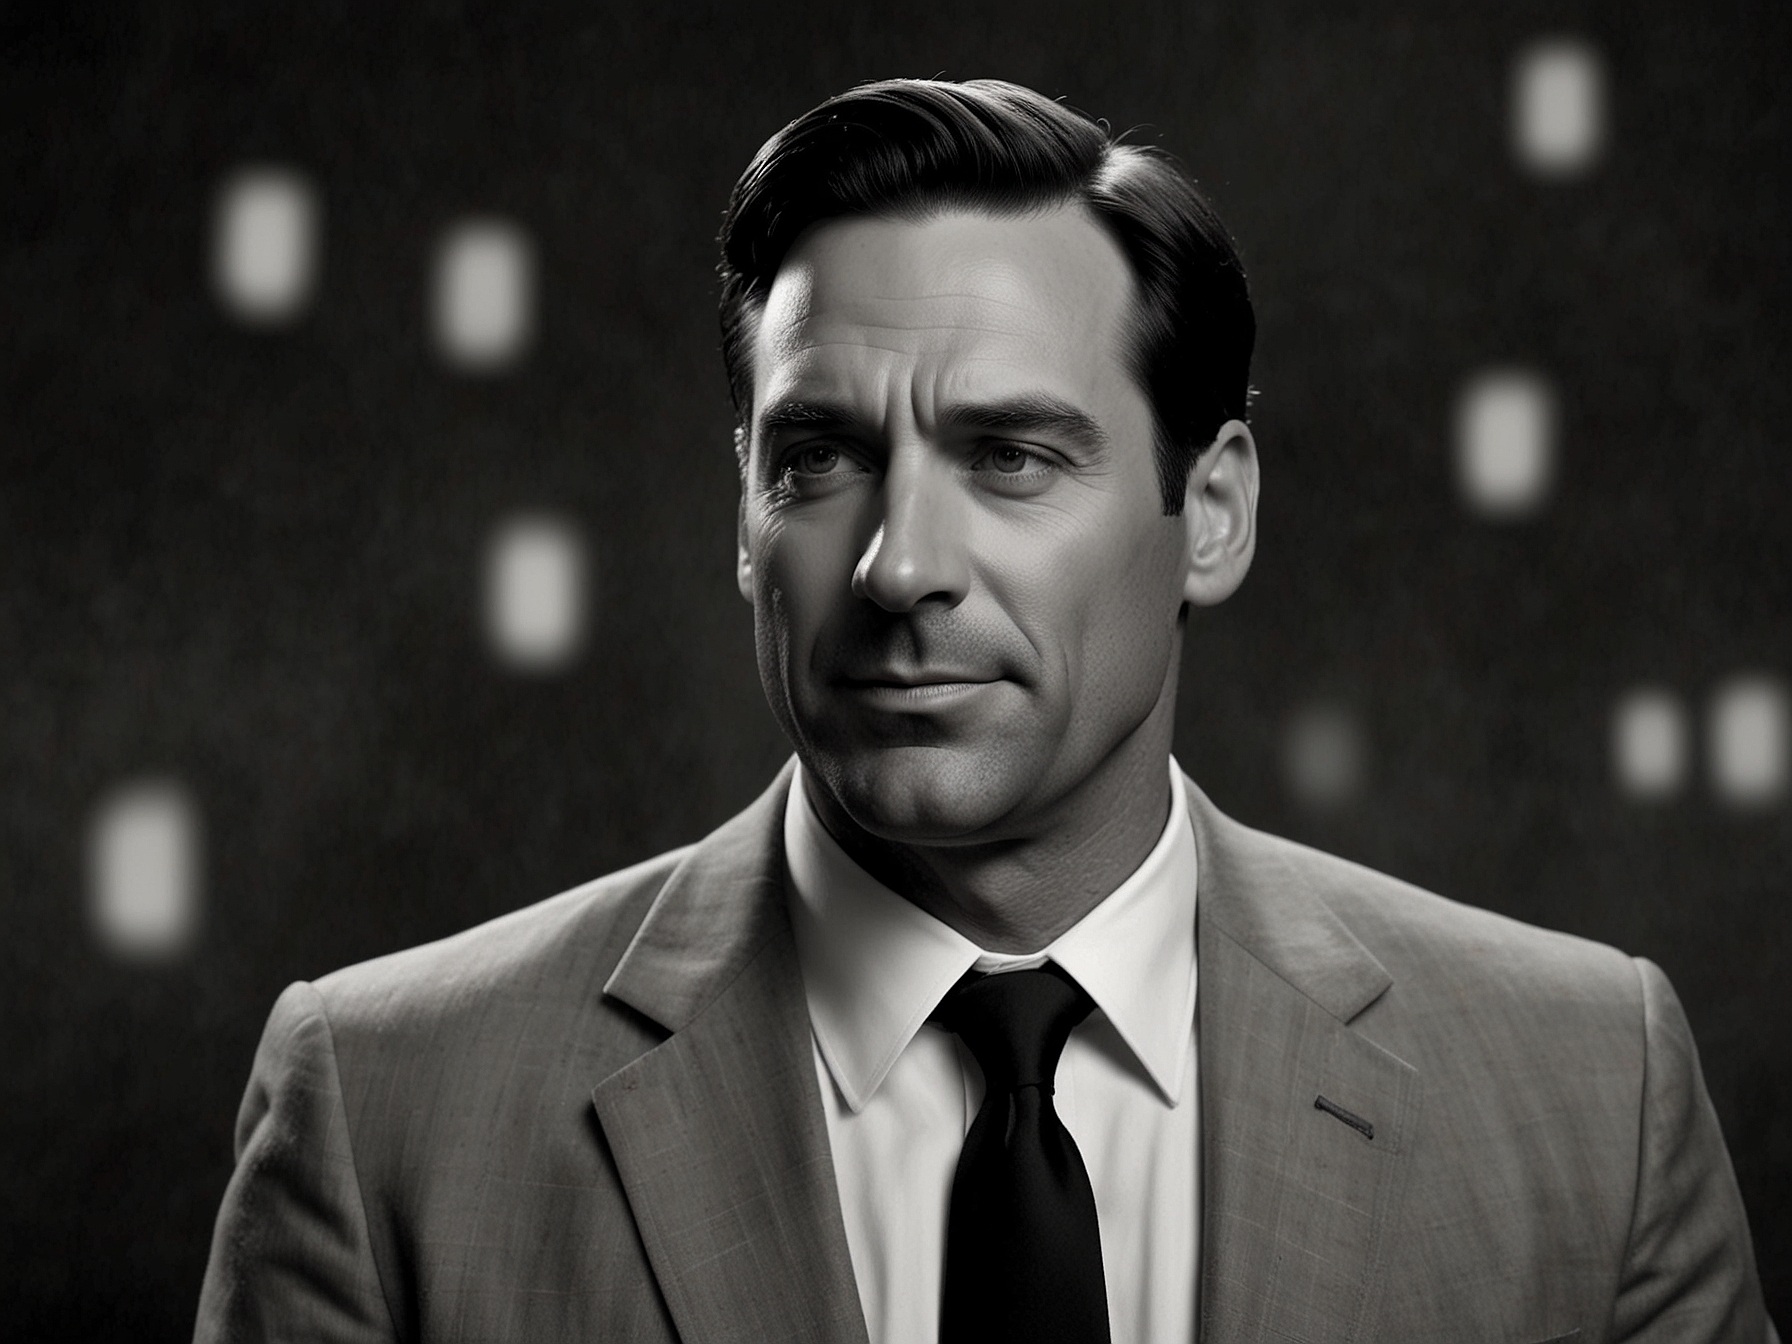 An artistic depiction of Jon Hamm as the emotion Envy, integrating seamlessly with the other emotions Joy, Sadness, Anger, and Fear from Inside Out, showcasing a dynamic interplay.